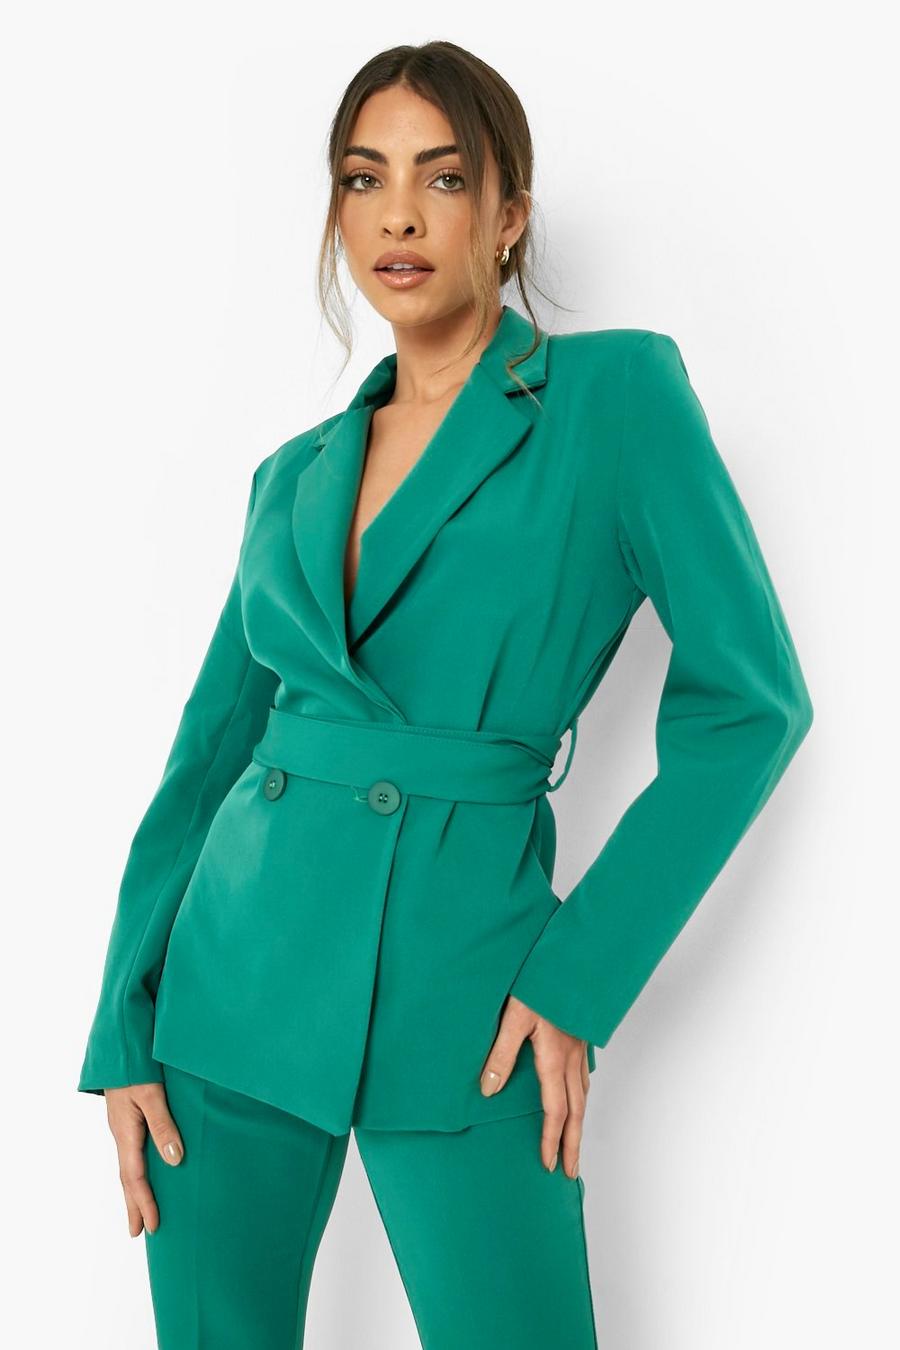 4 Boohoo Women Clothing Jackets Blazers Womens Fitted Tailored Blazer 